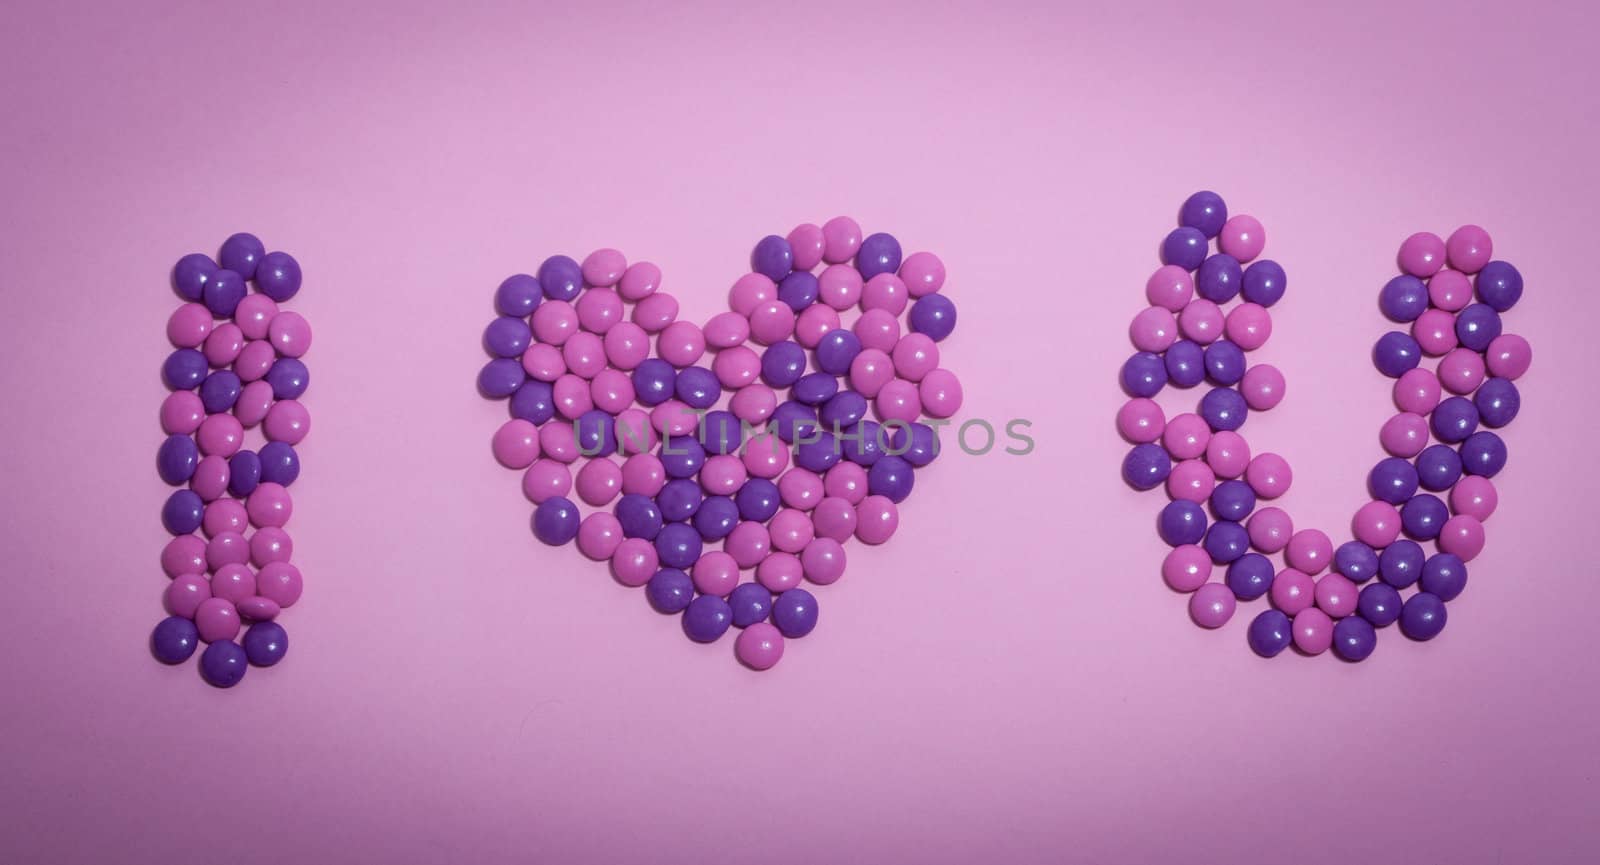 A bunch of chocolate buttons, in various colors such as pink, purple spelling "I love you".